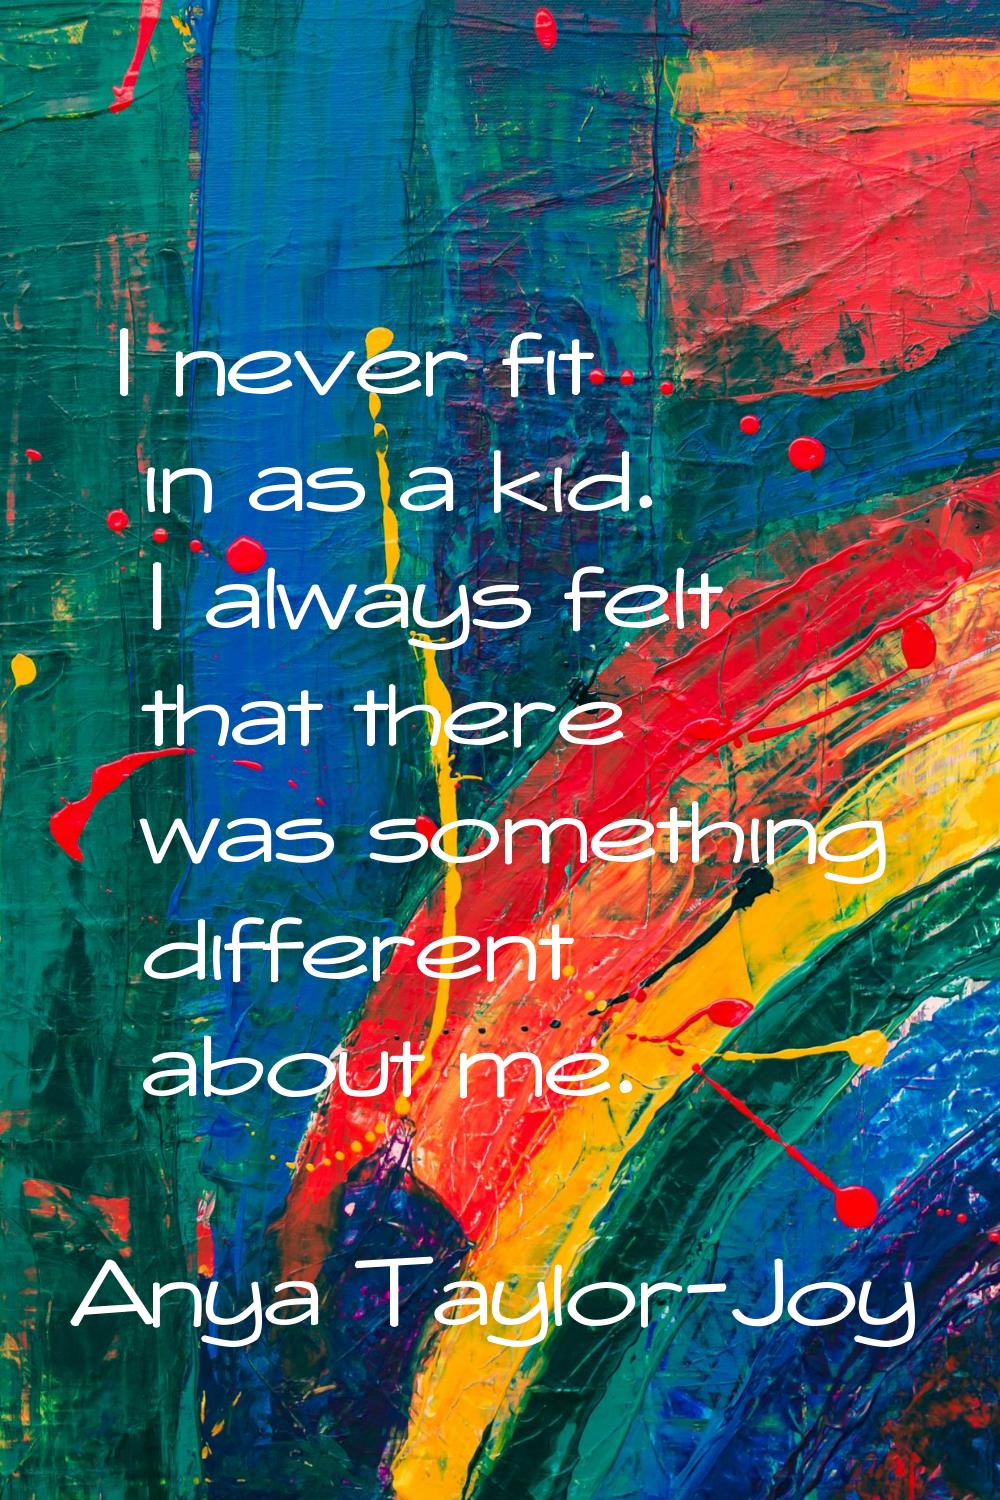 I never fit in as a kid. I always felt that there was something different about me.